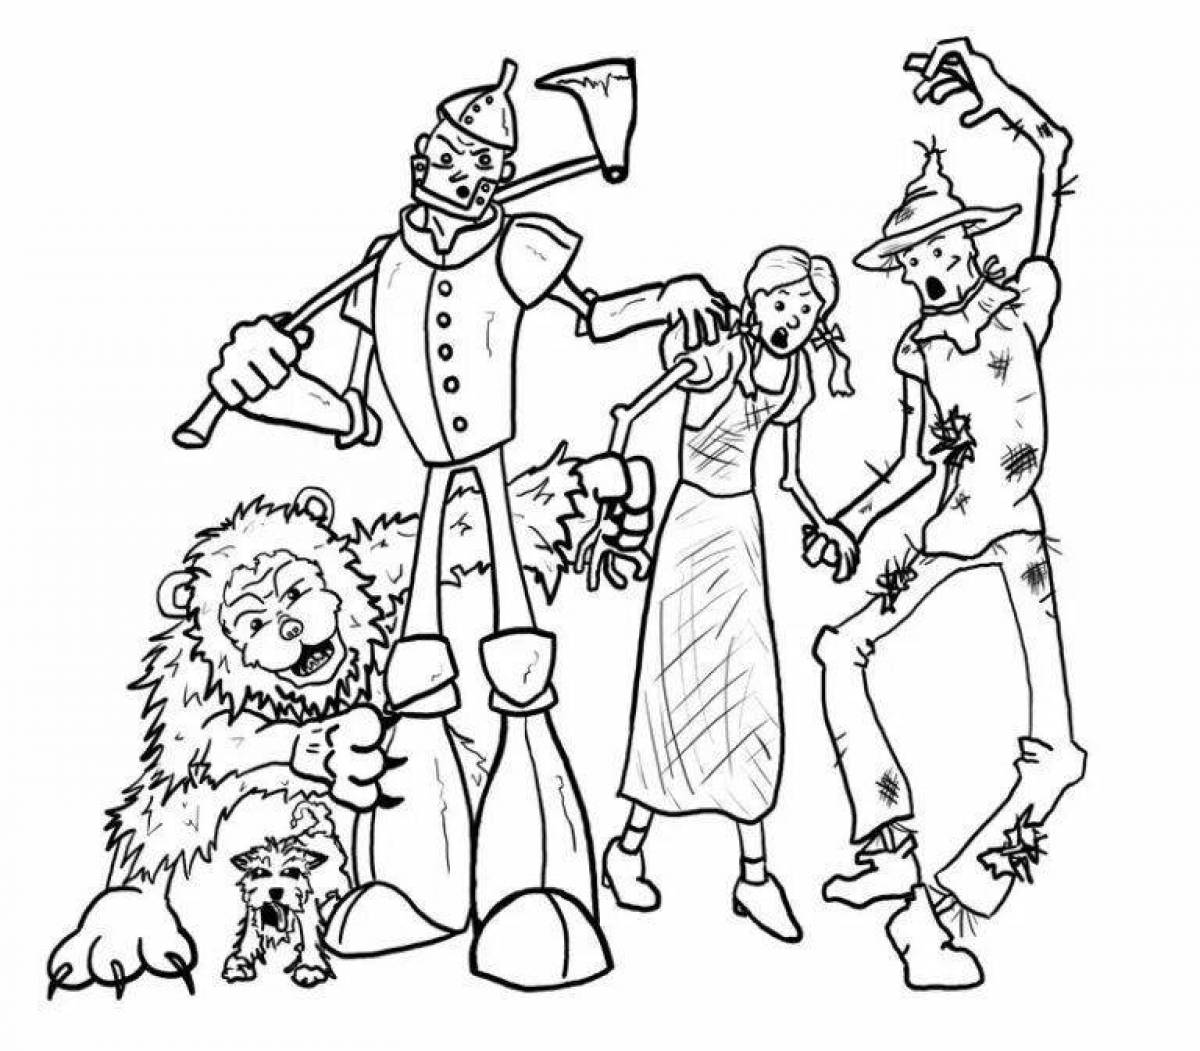 Vibrant Wizard of Oz Coloring Page